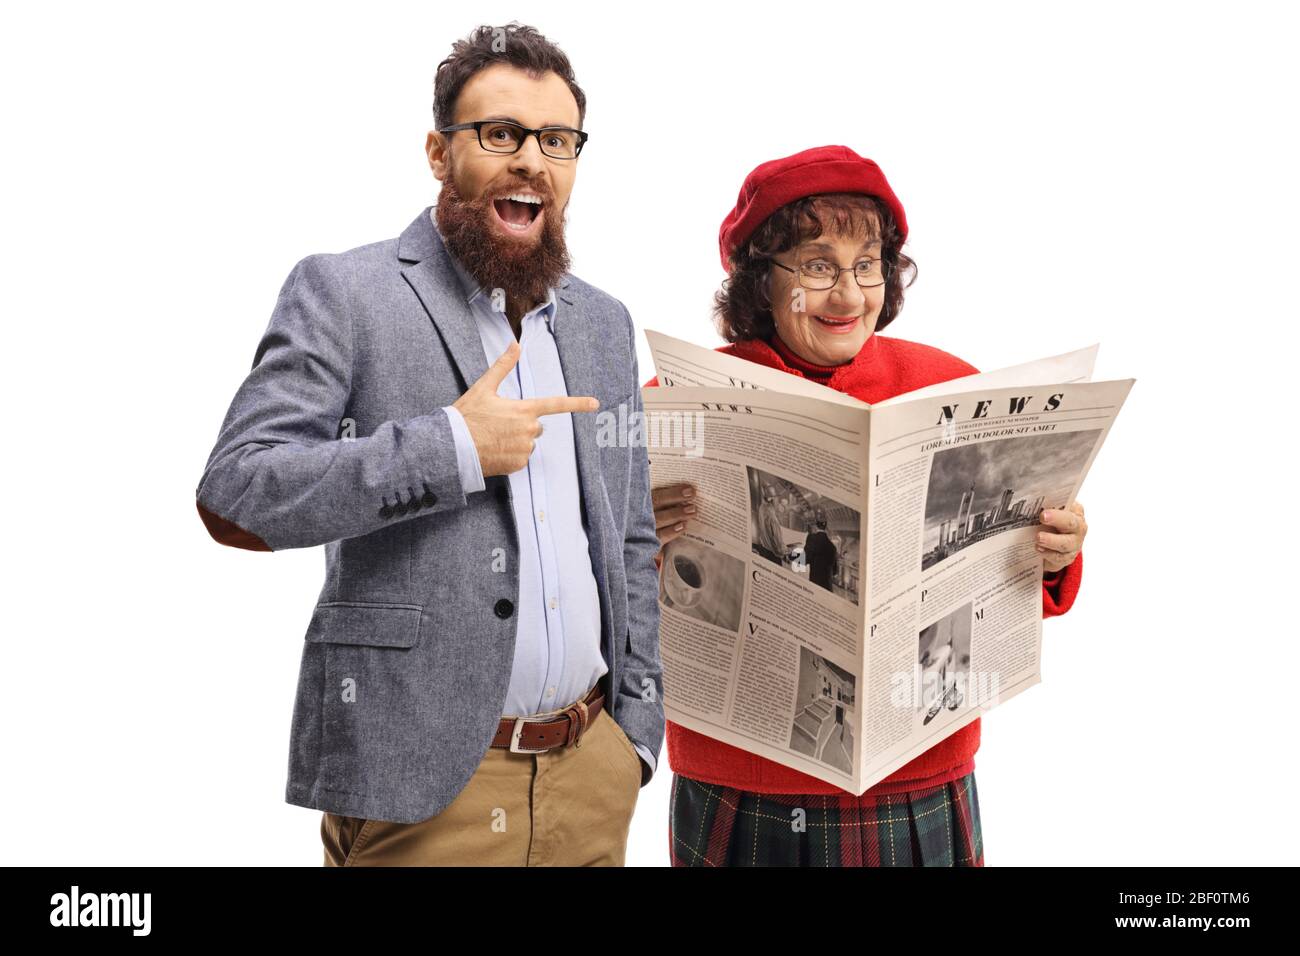 Bearded man laughing and pointing at an elderly woman reading a newspaper isolated on white background Stock Photo